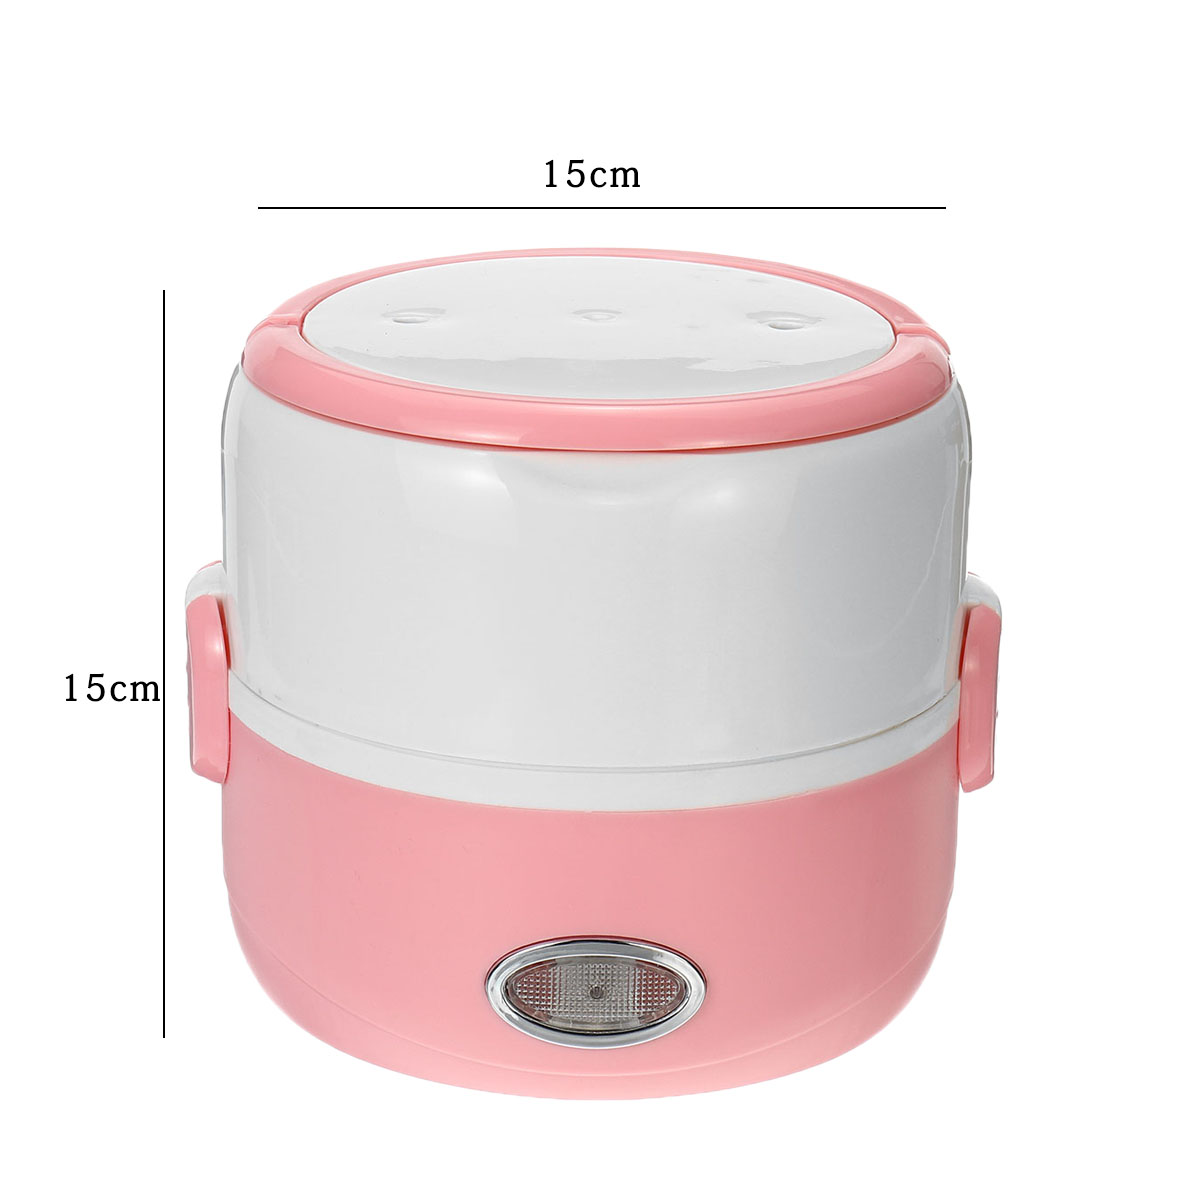 230W-13L-Portable-Electric-Stainless-Steel-Lunch-Bento-Box-Picnic-Bag-Heated-Food-Storage-Warmer-Hot-1661057-10